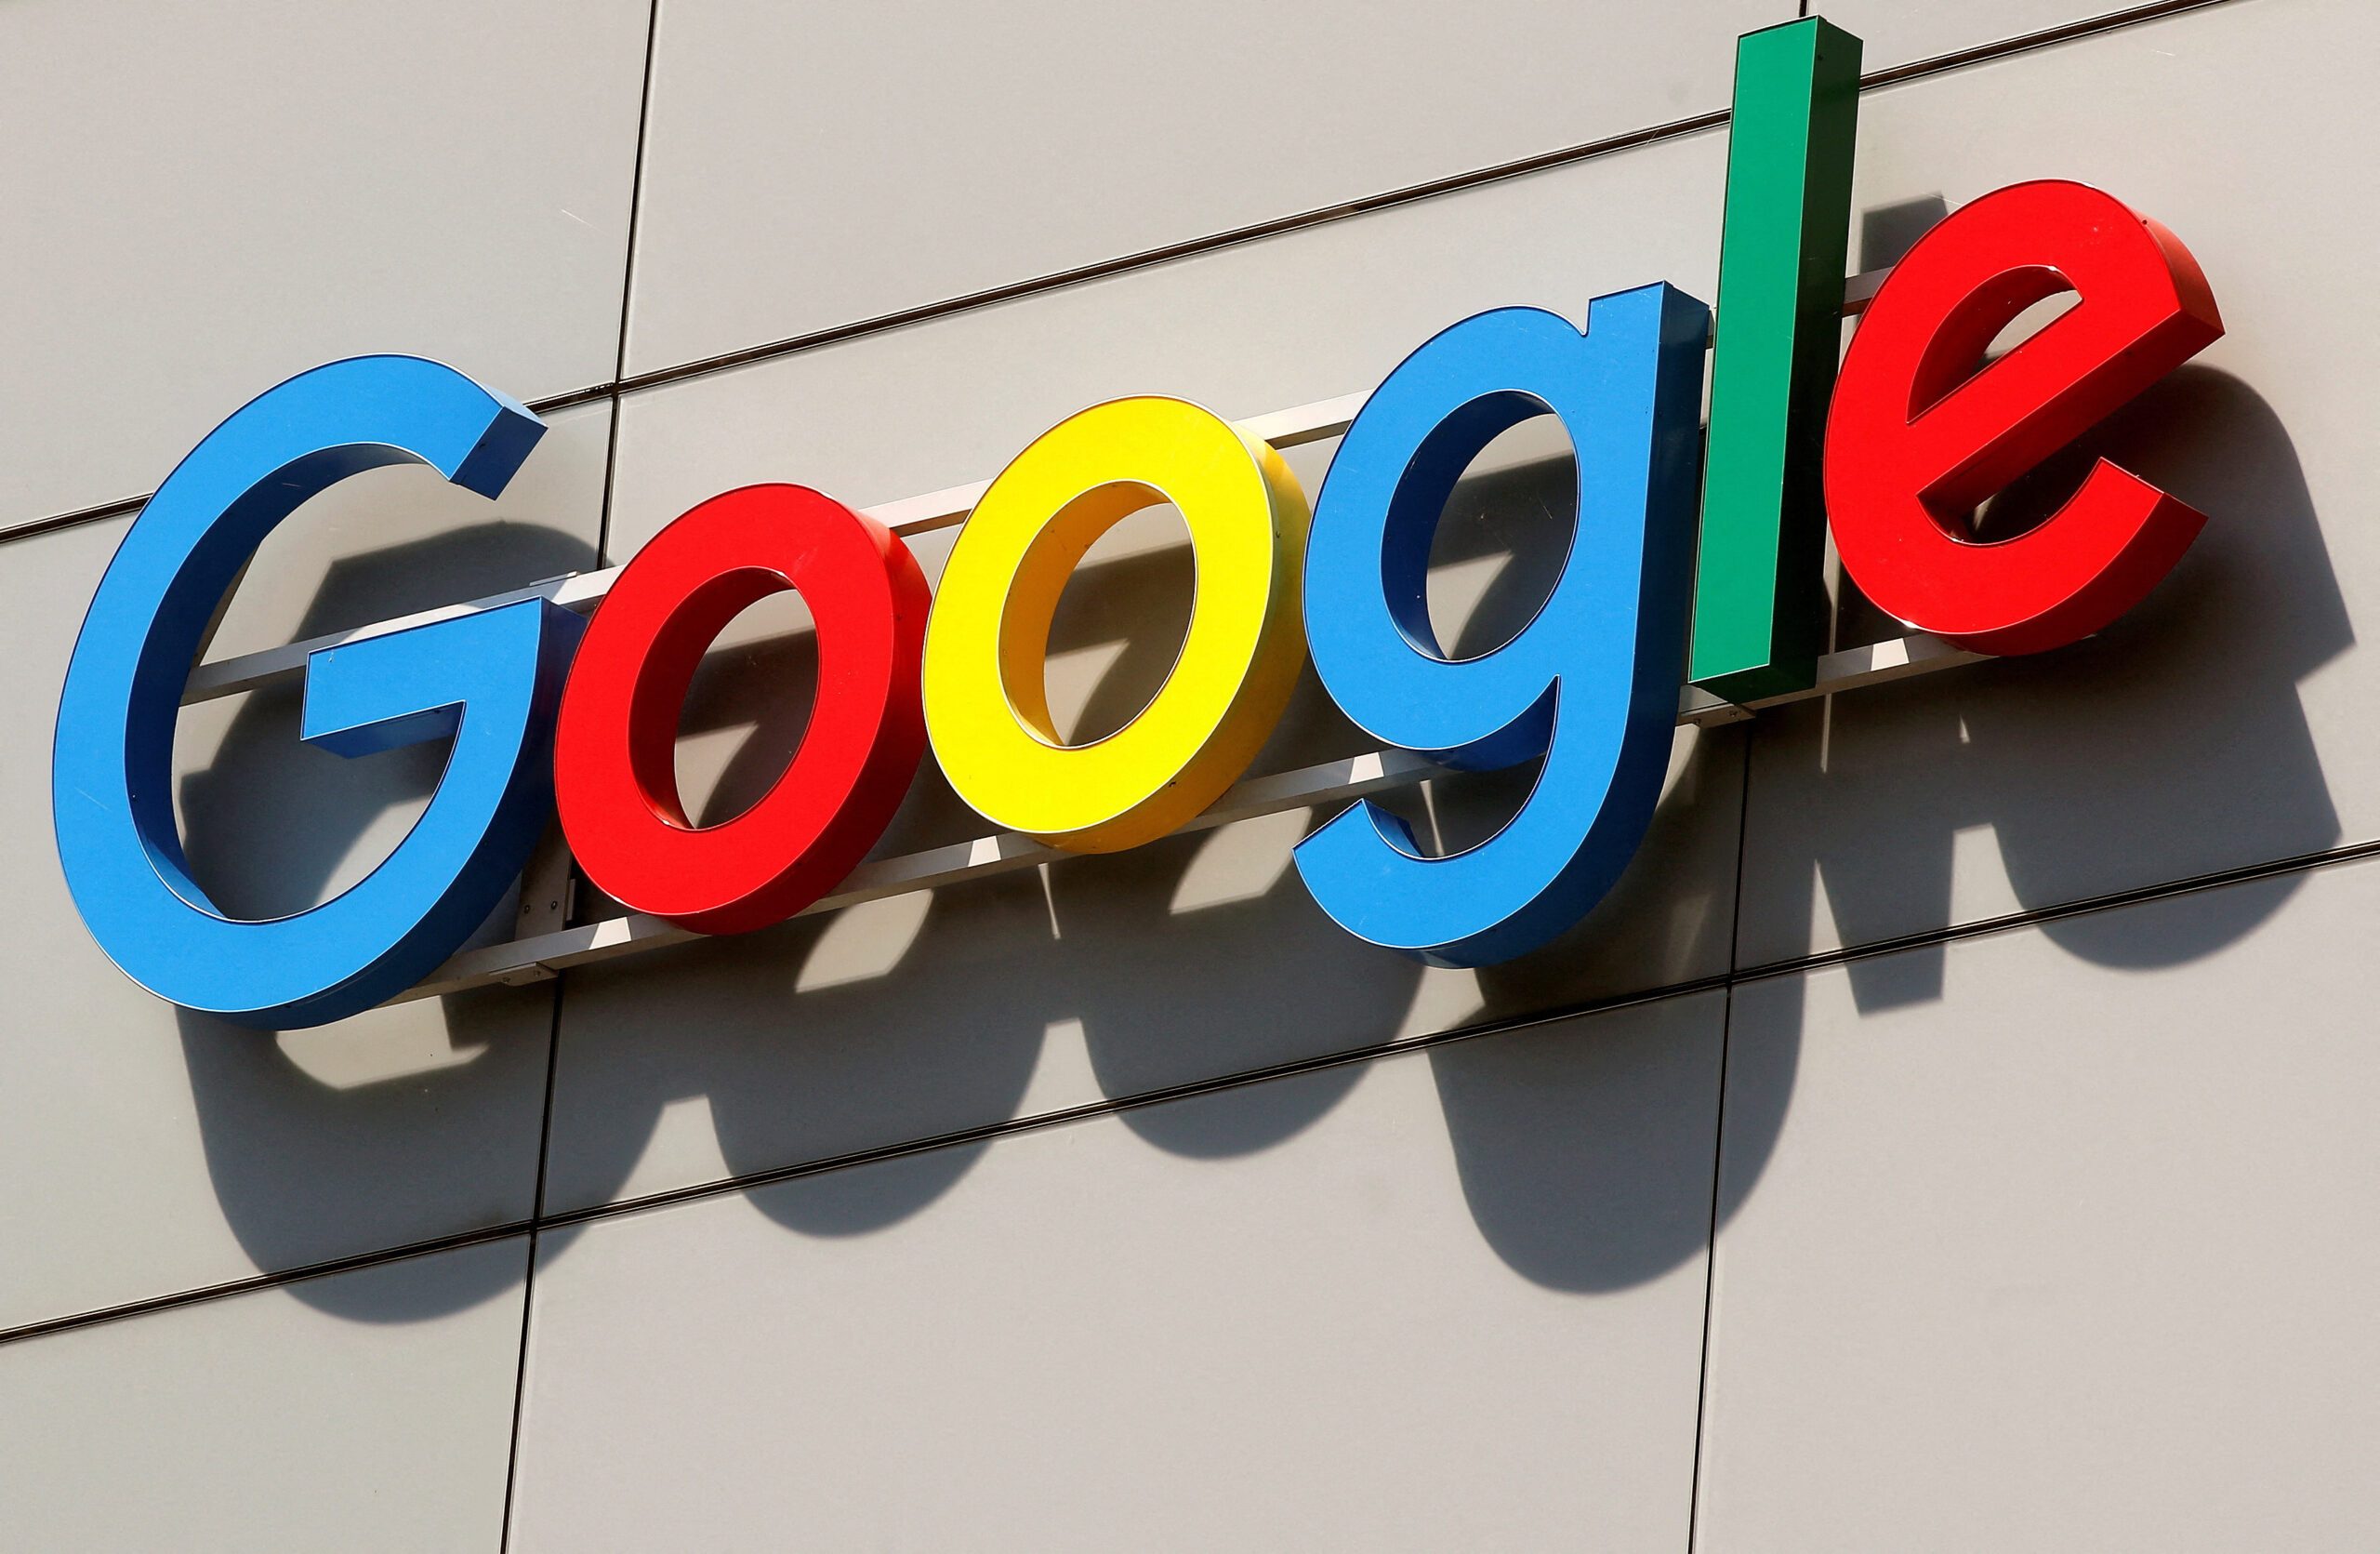 Google’s rivals get day in court as momentous US antitrust trial begins